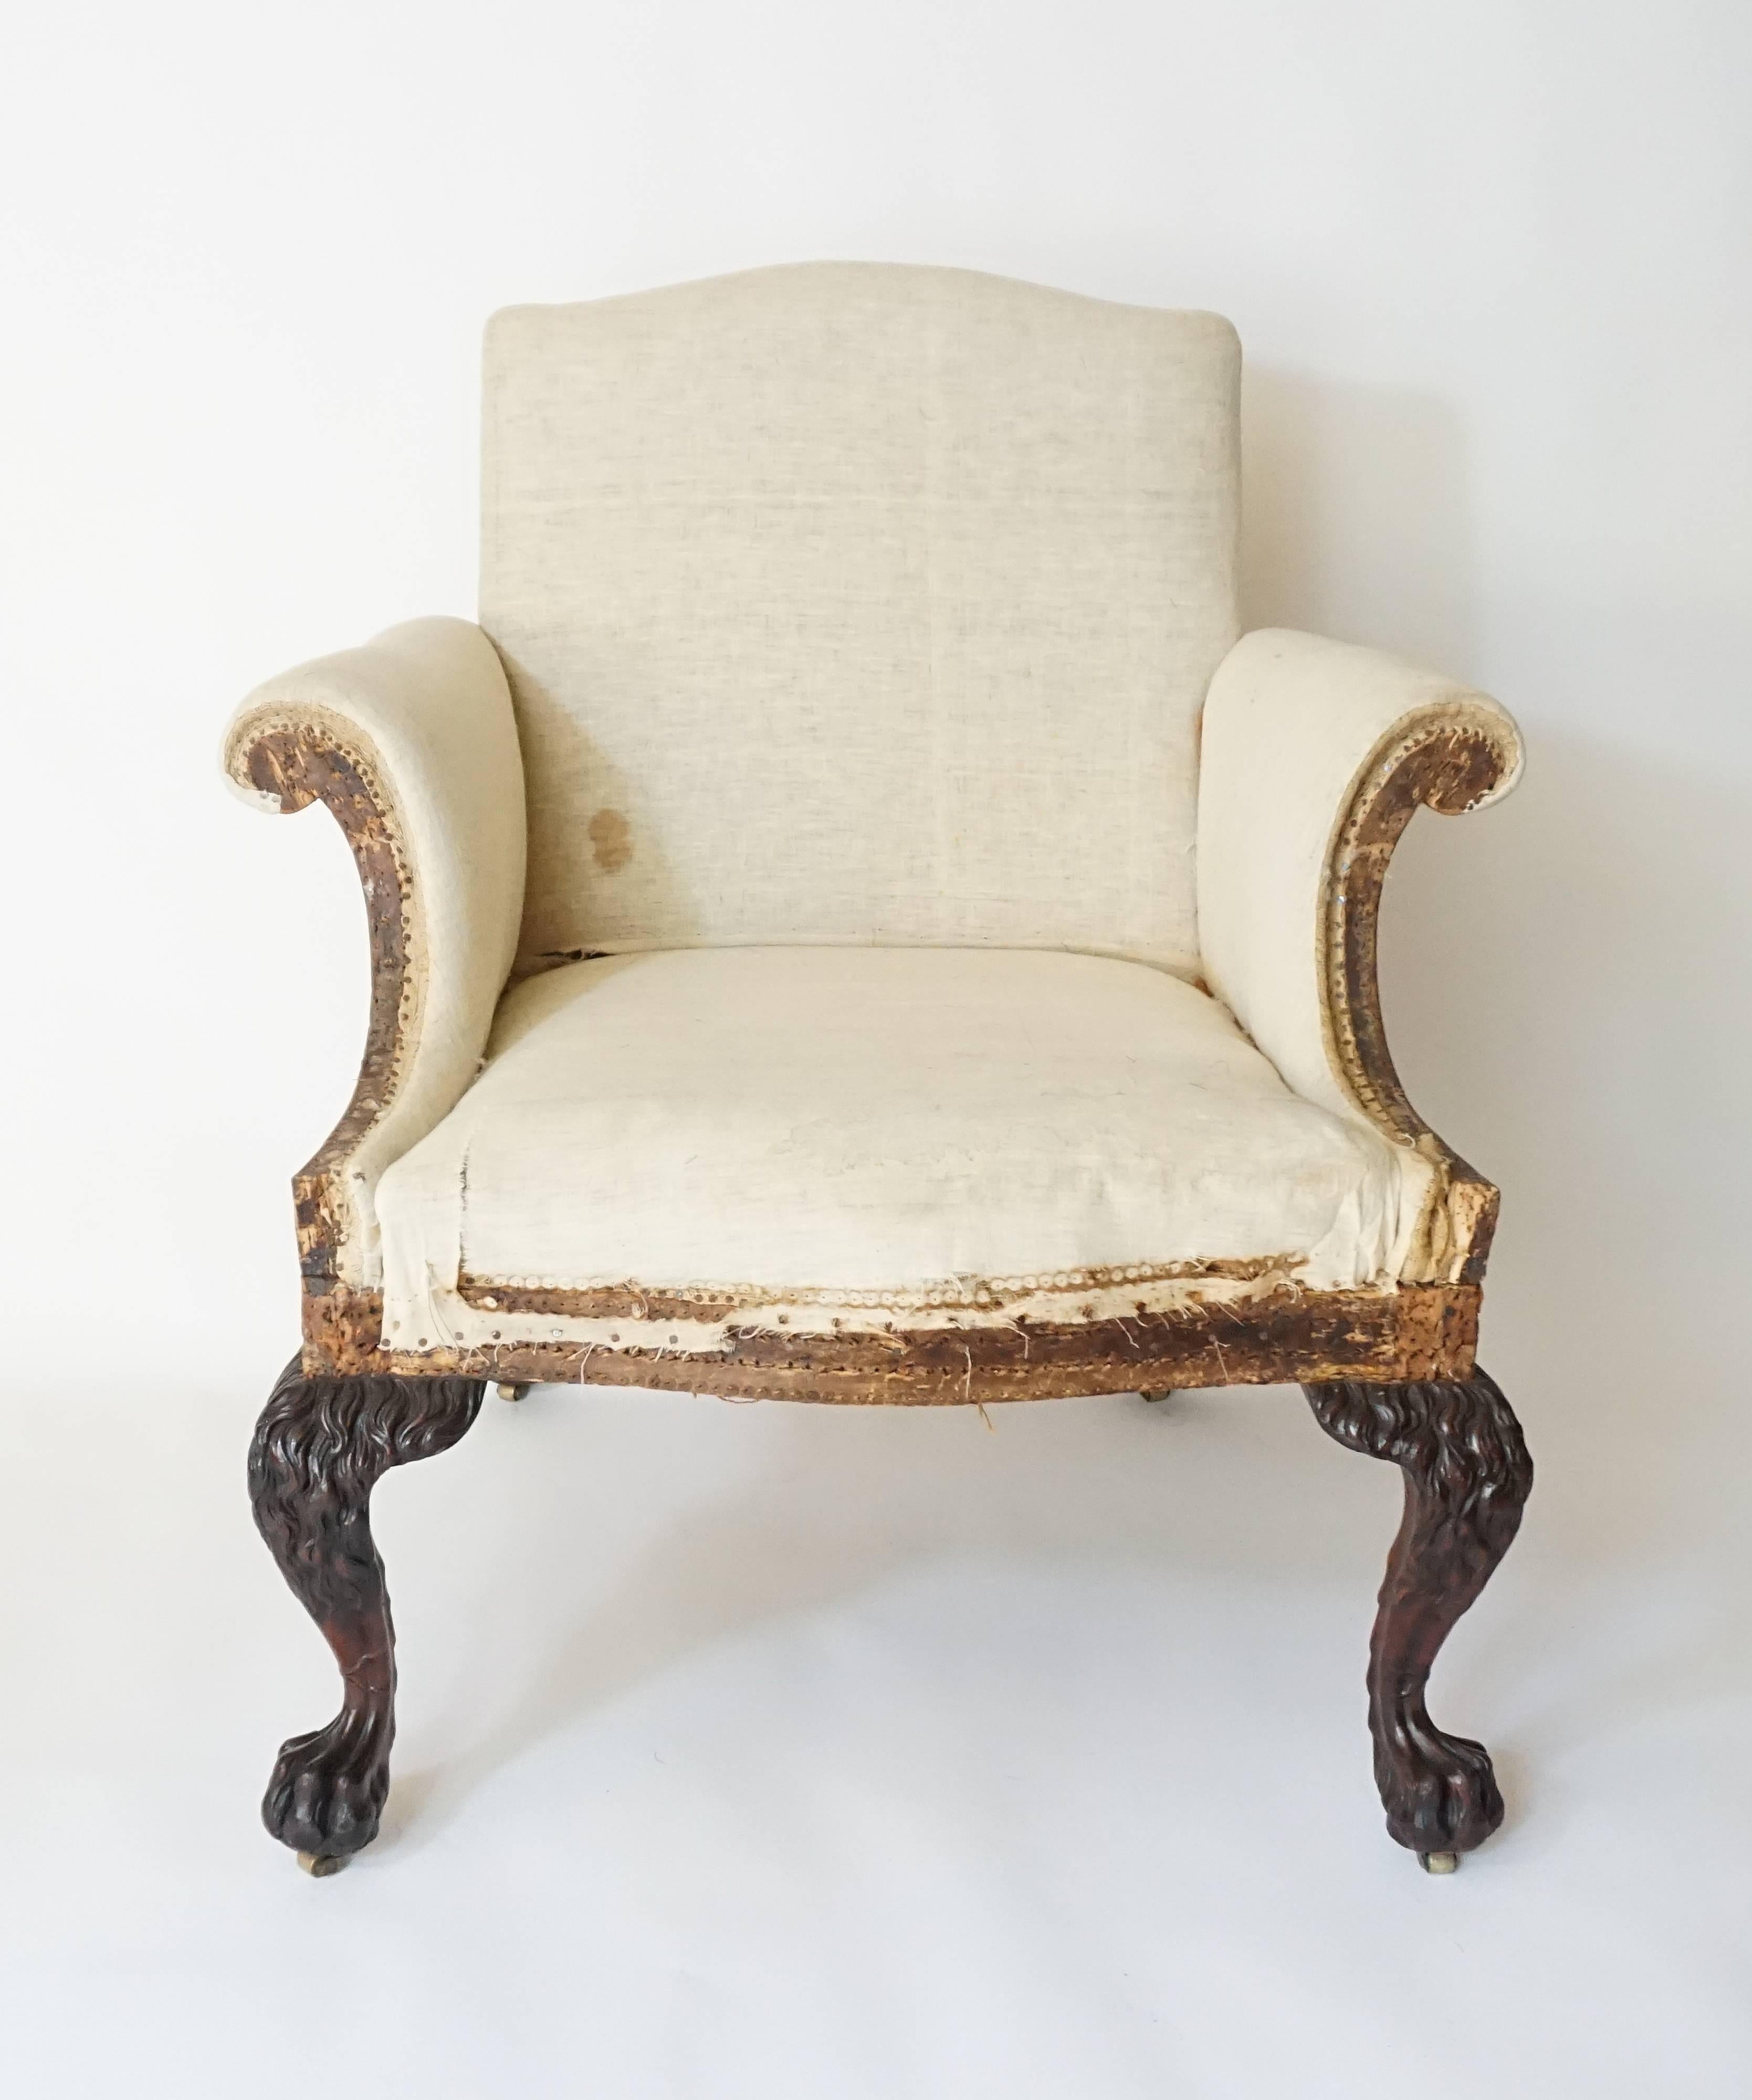 Early 20th Century George II Style Armchair by Lenygon & Company